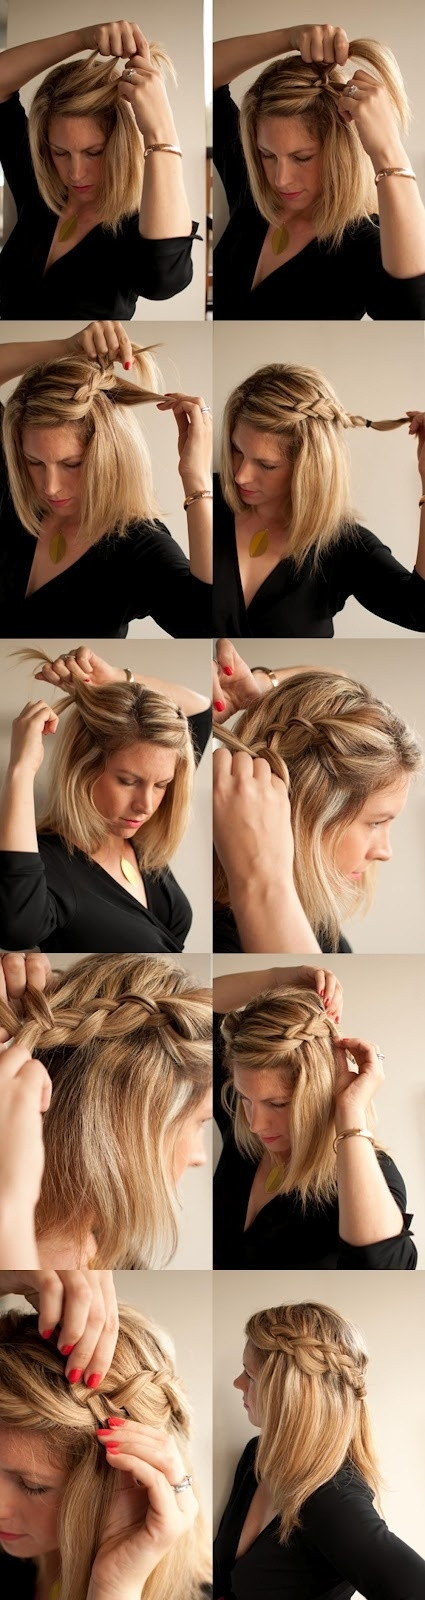 Braid Hairstyles Tutorial
 11 Interesting And Useful Hair Tutorials For Every Day